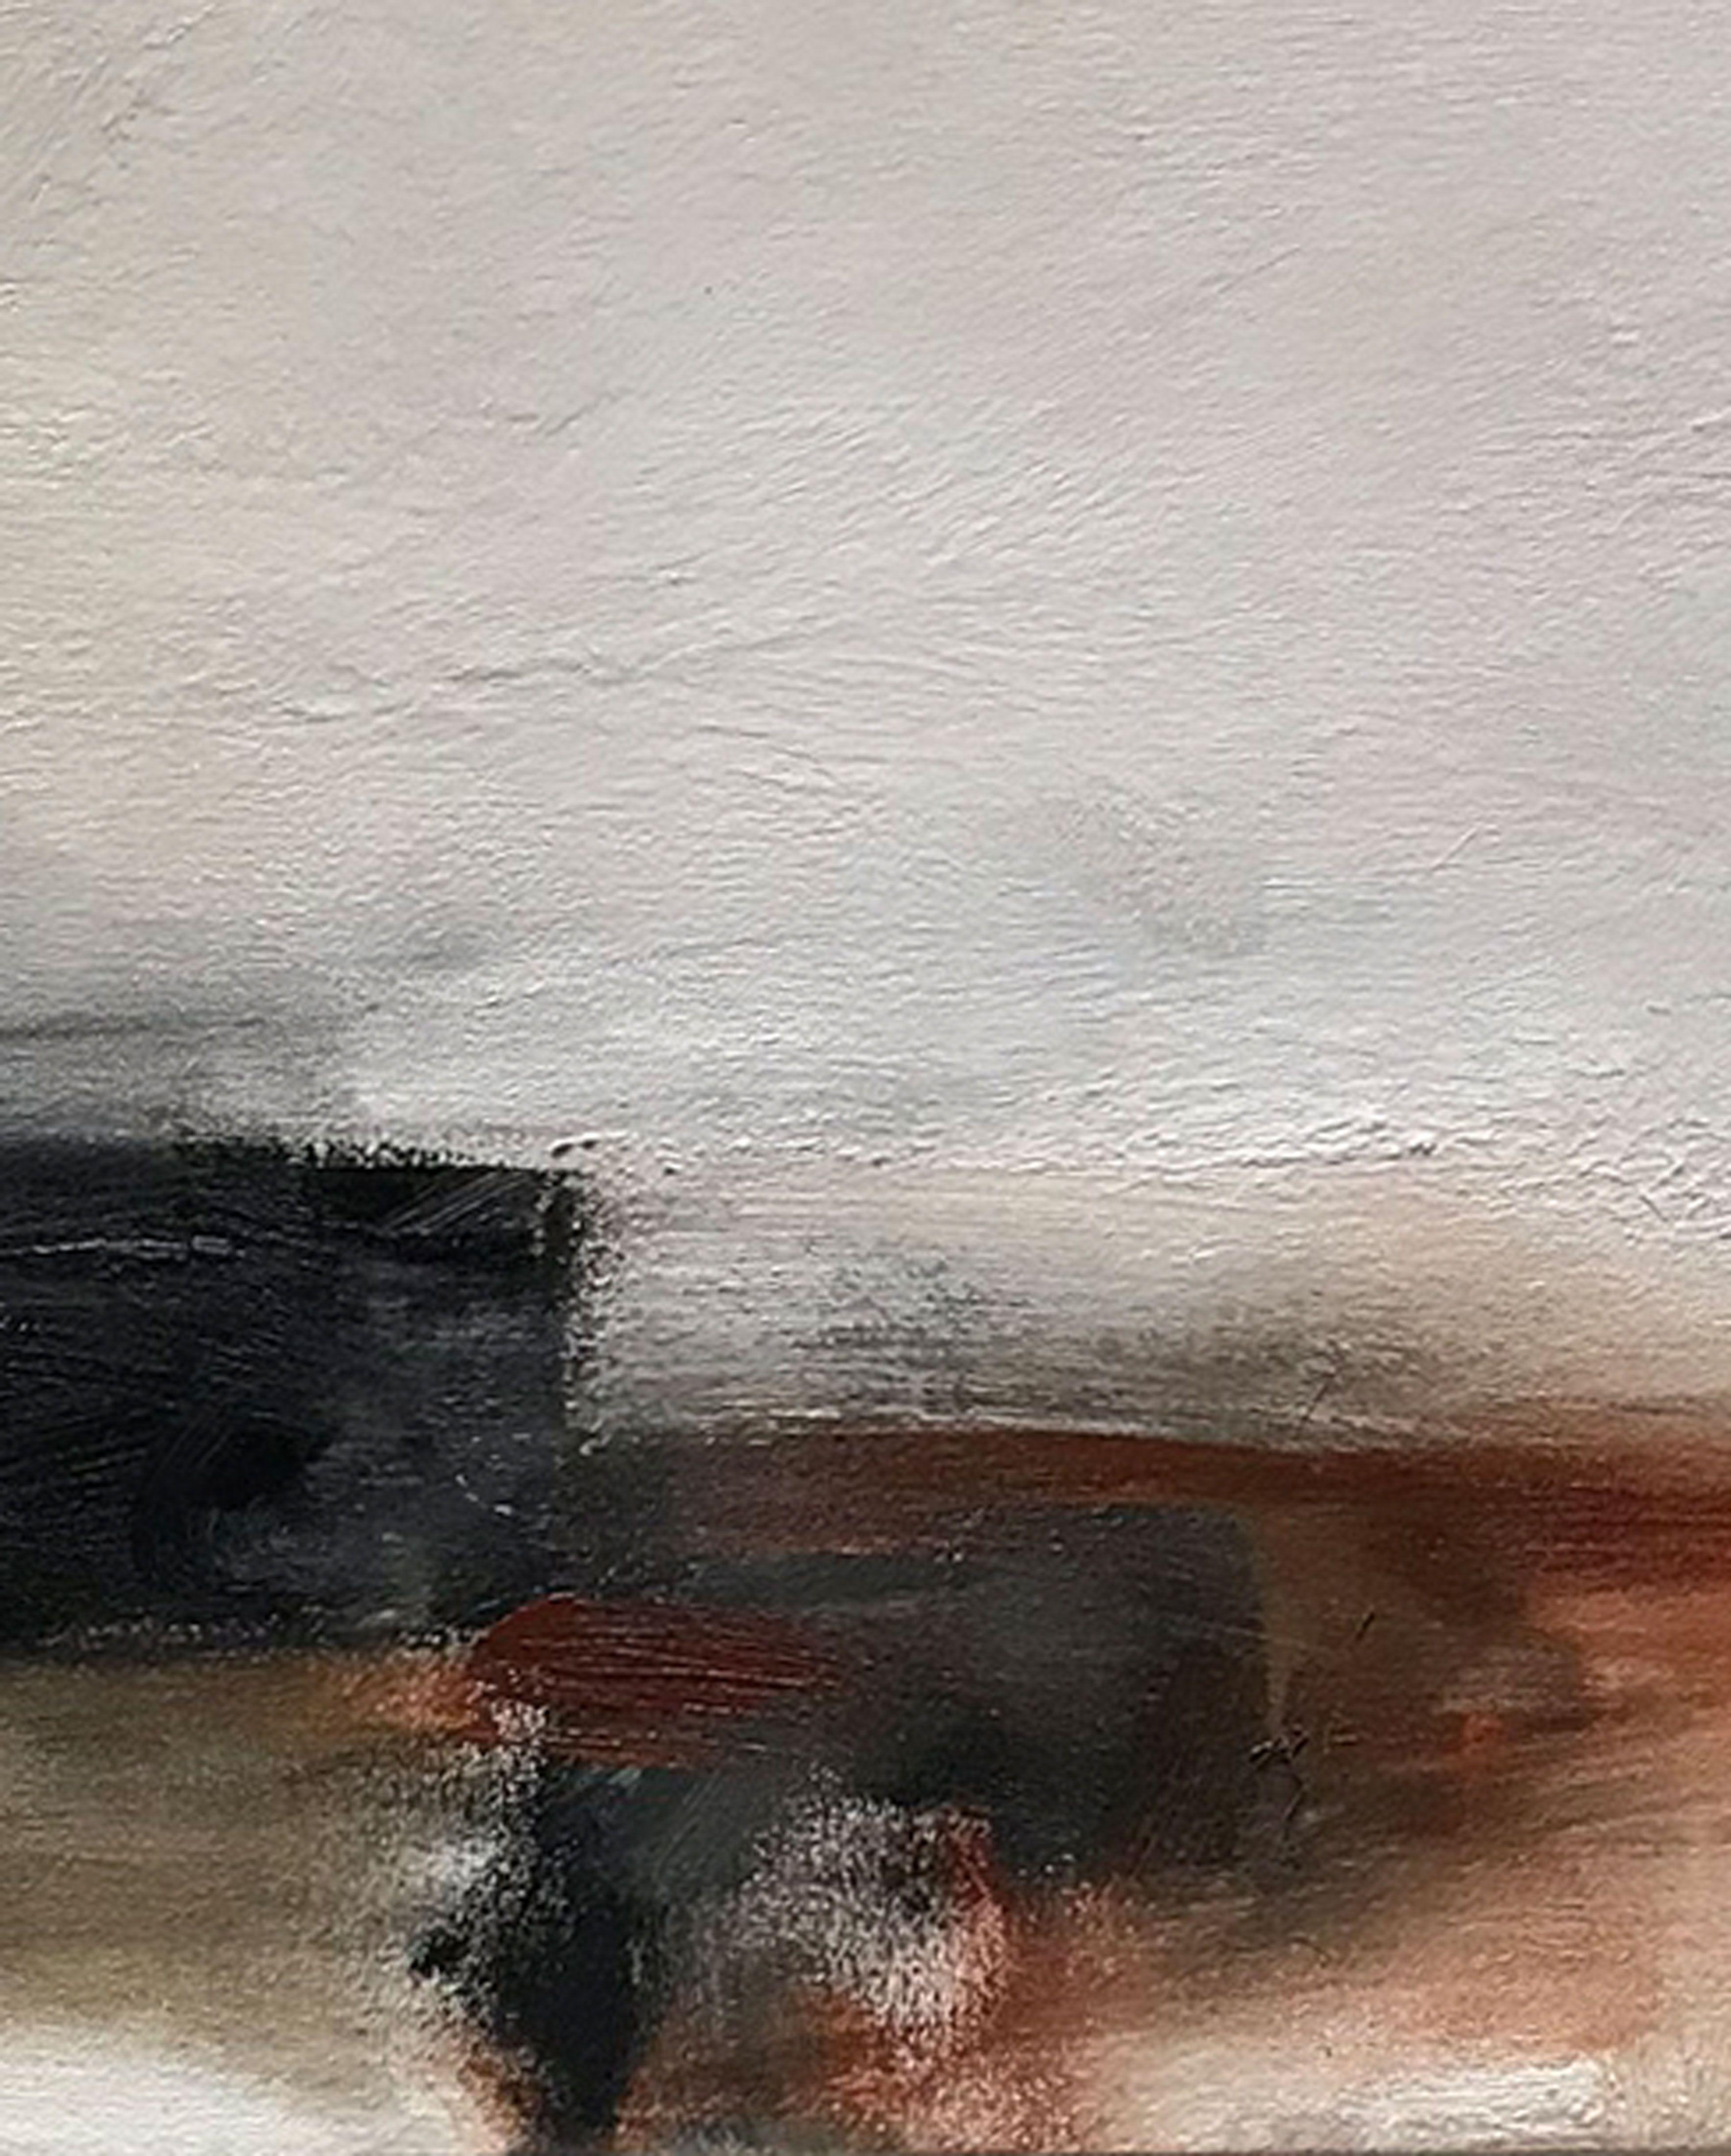 Become the Sky, Painting, Oil on Canvas - Gray Abstract Painting by Judy Hintz Cox